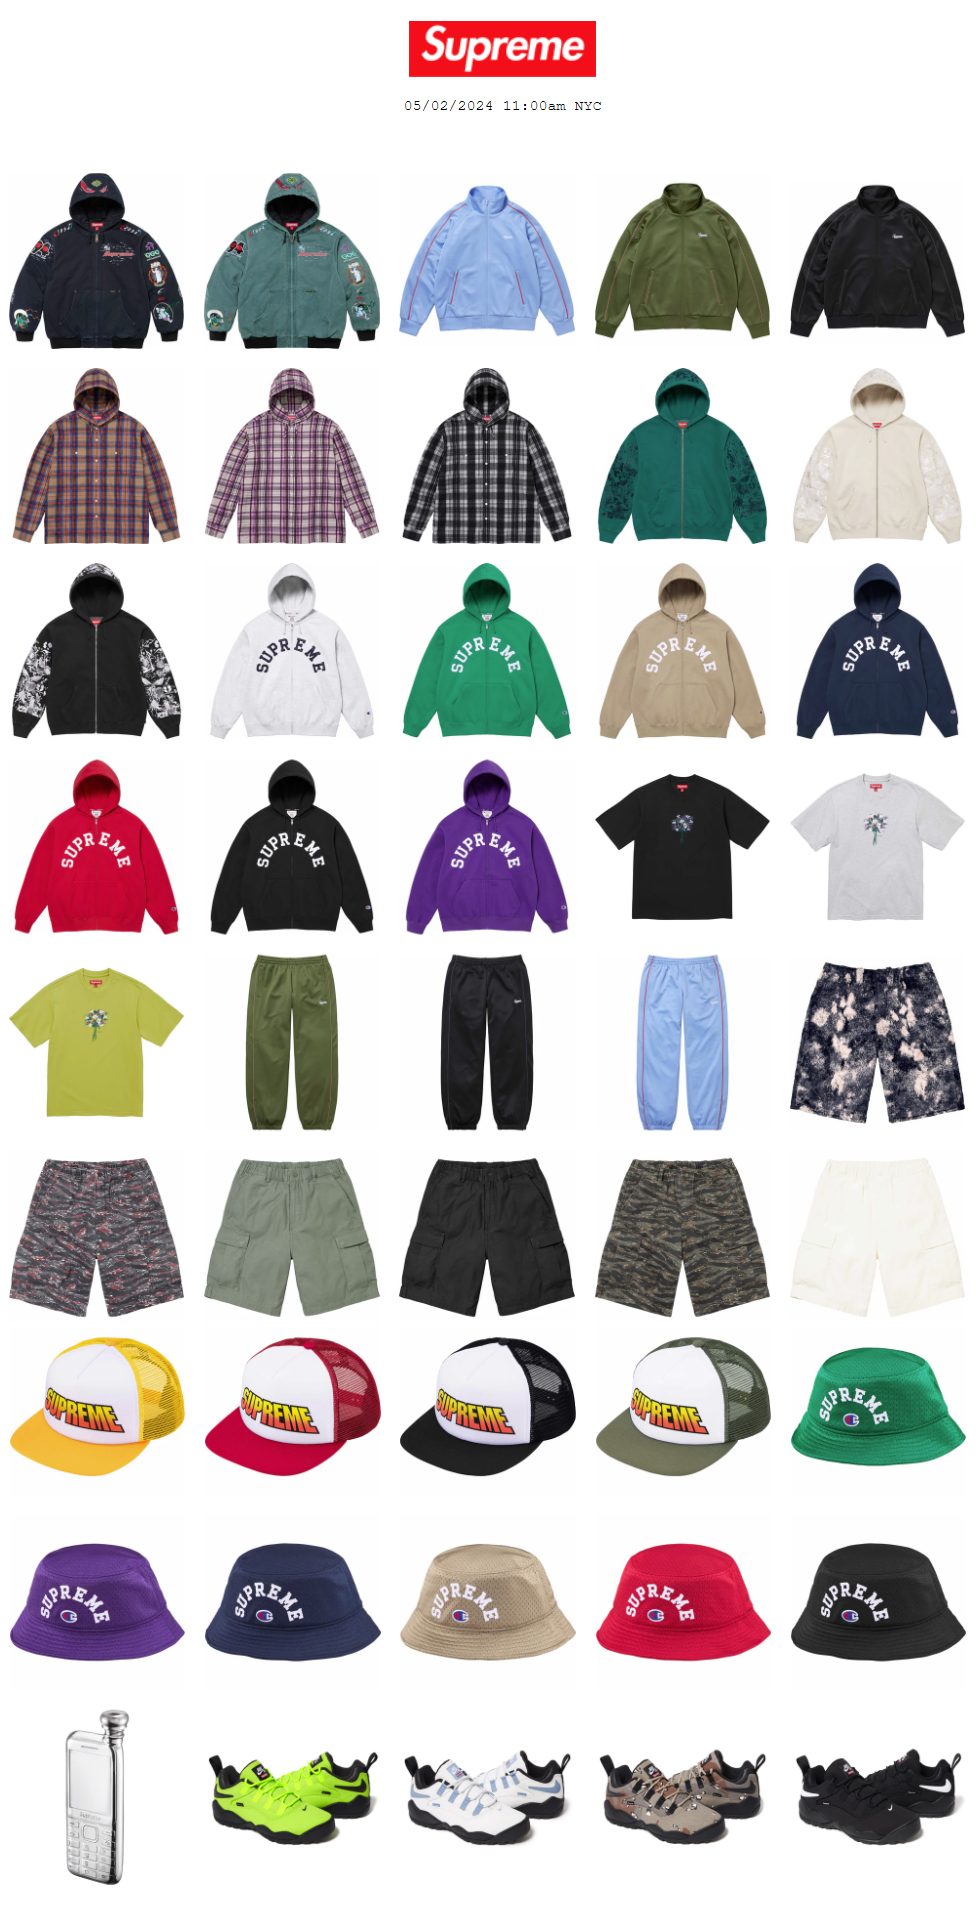 Supreme 公式通販サイトで5月4日 Week12に発売予定の24SS 新作アイテム 